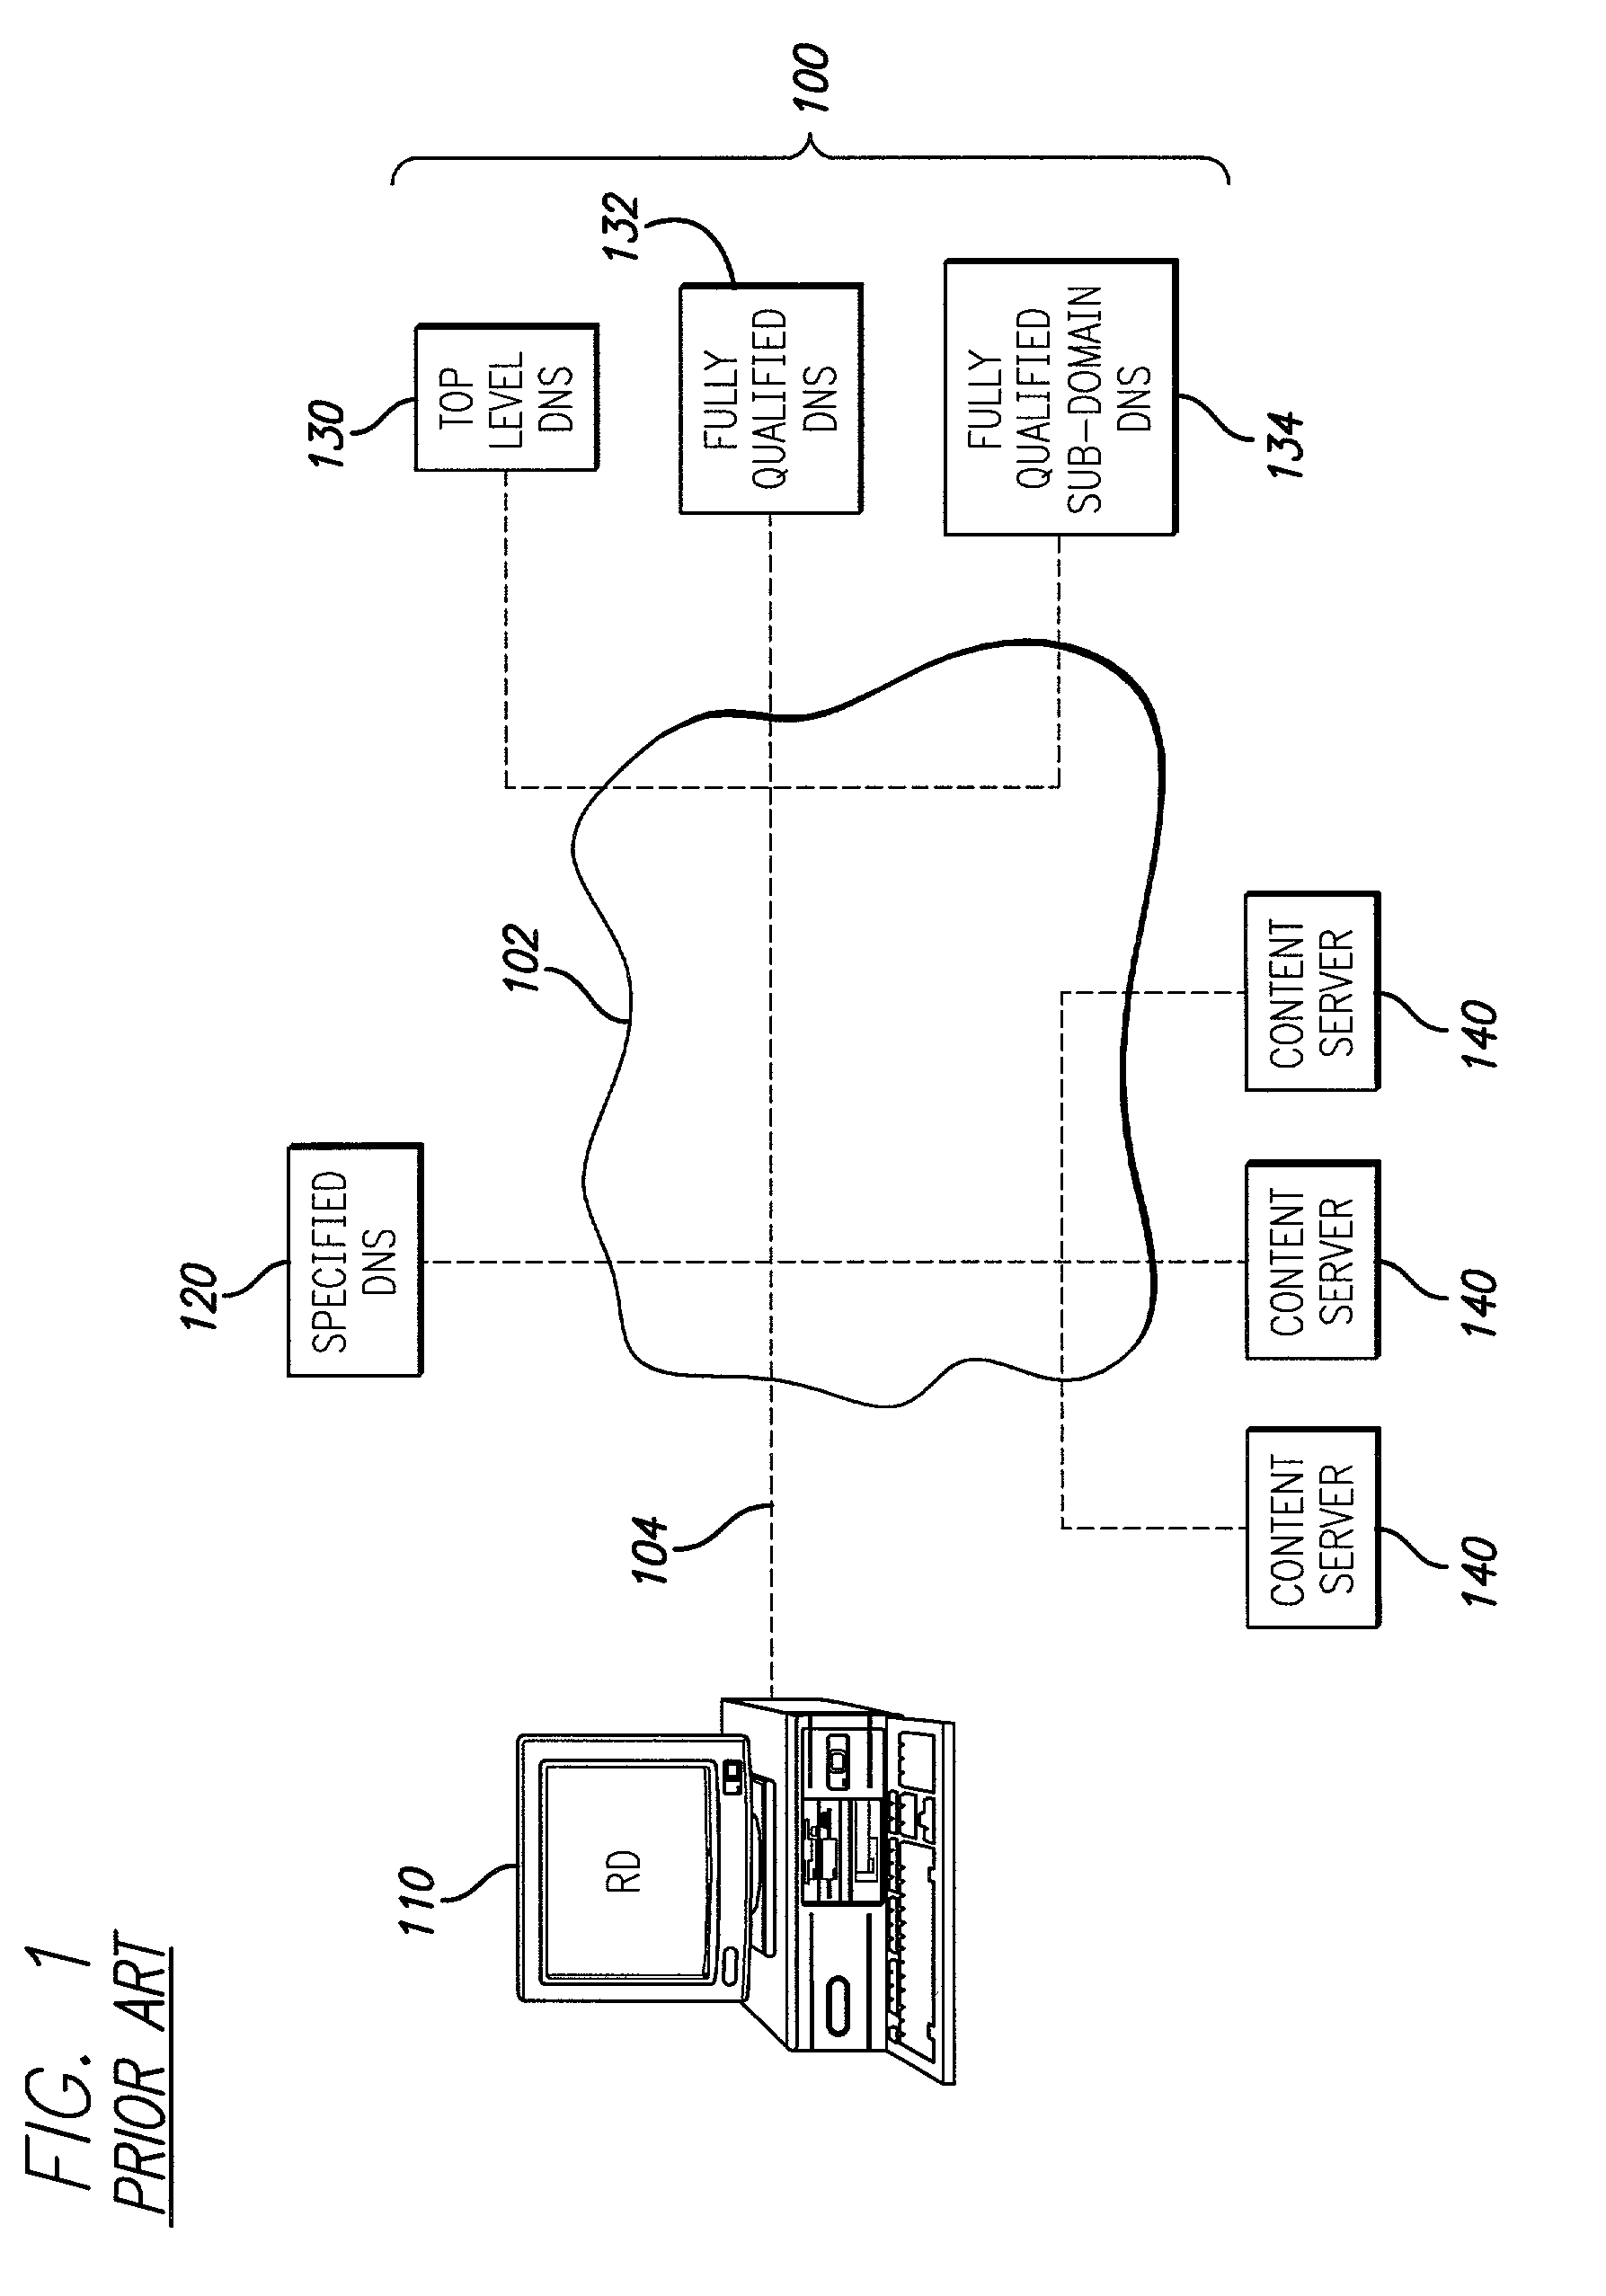 System and method for serving content over a wide area network